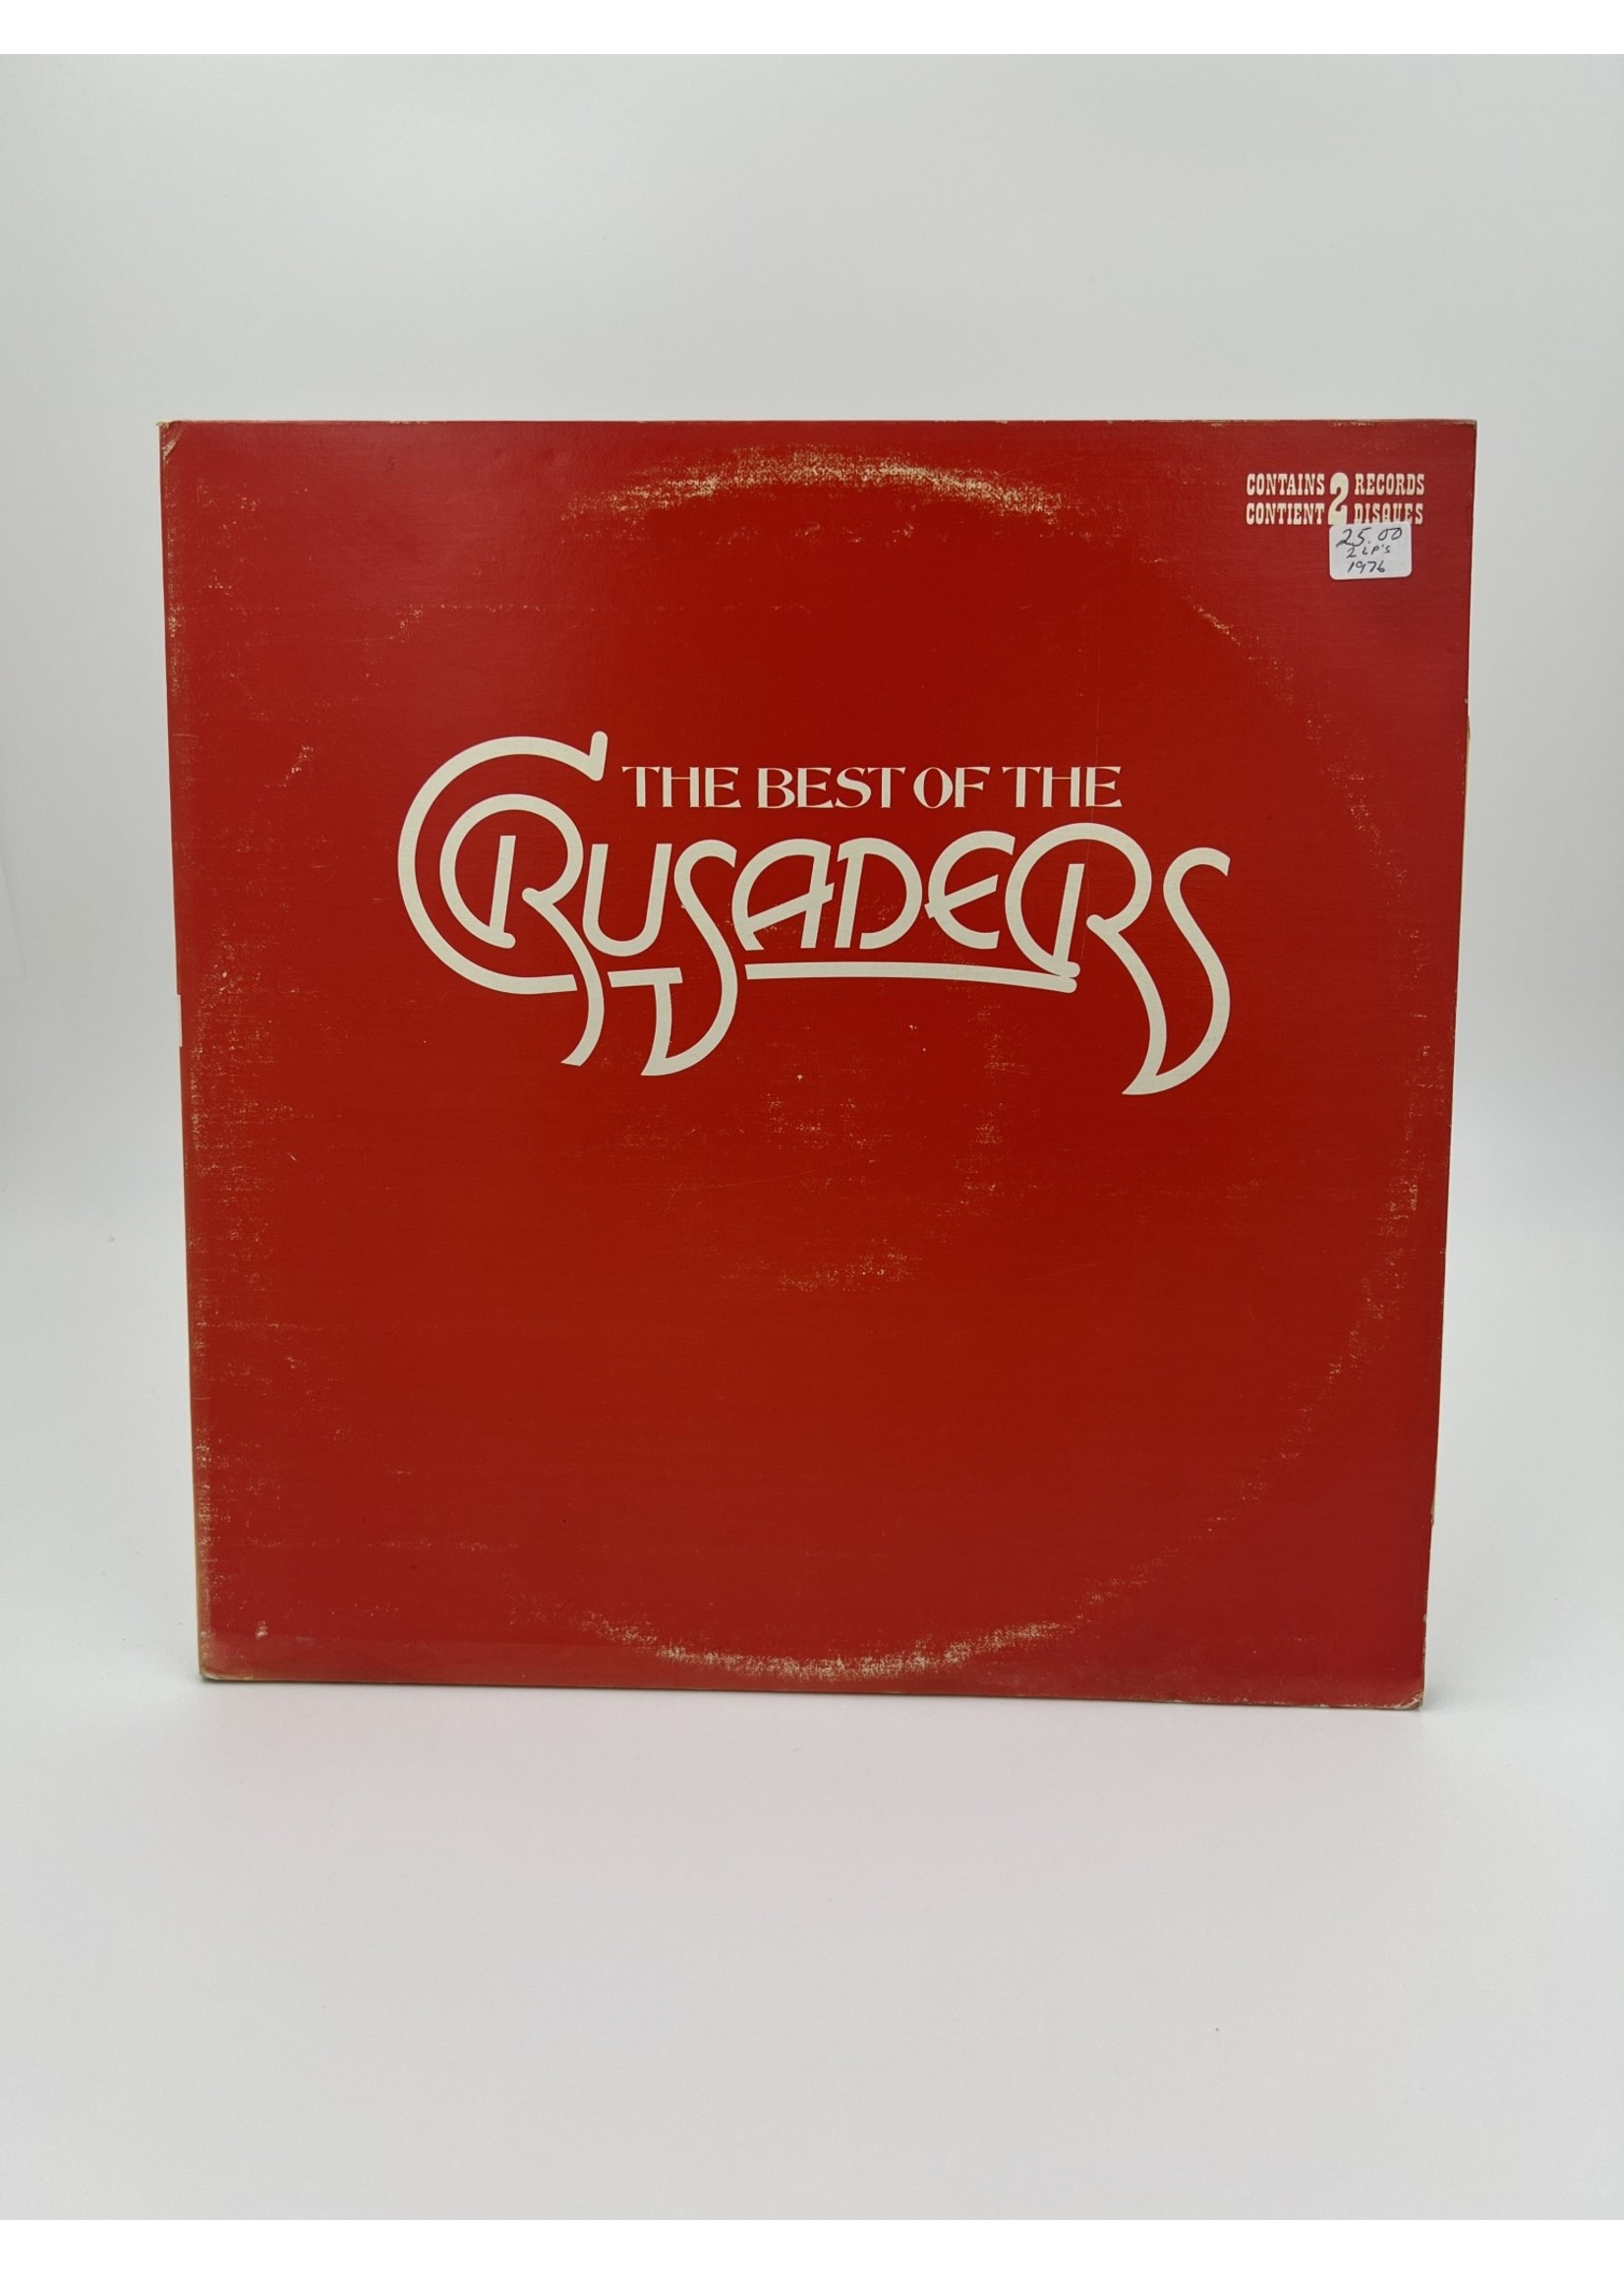 LP The Best Of The Crusaders LP 2 RECORD